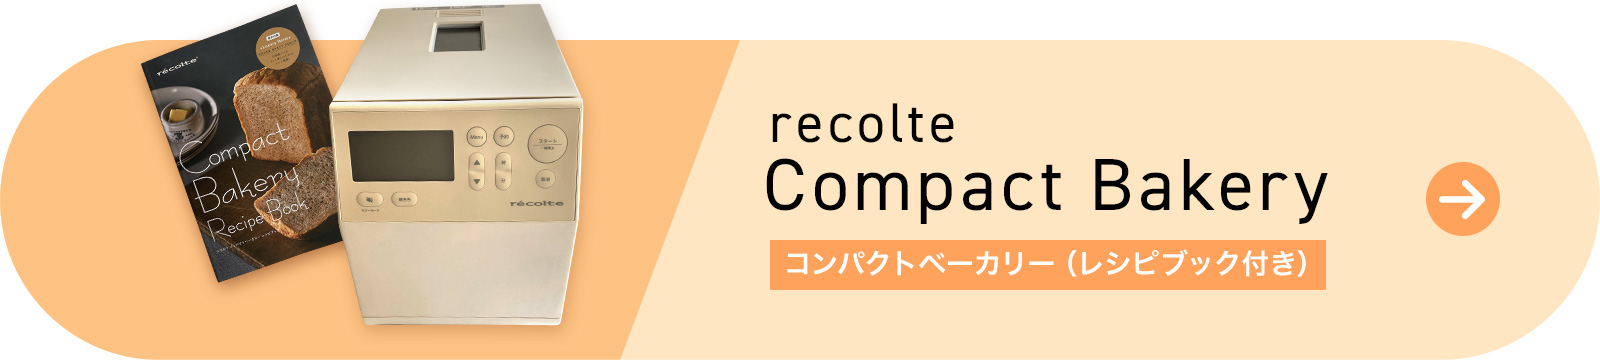 recolteコンパクトベーカリー